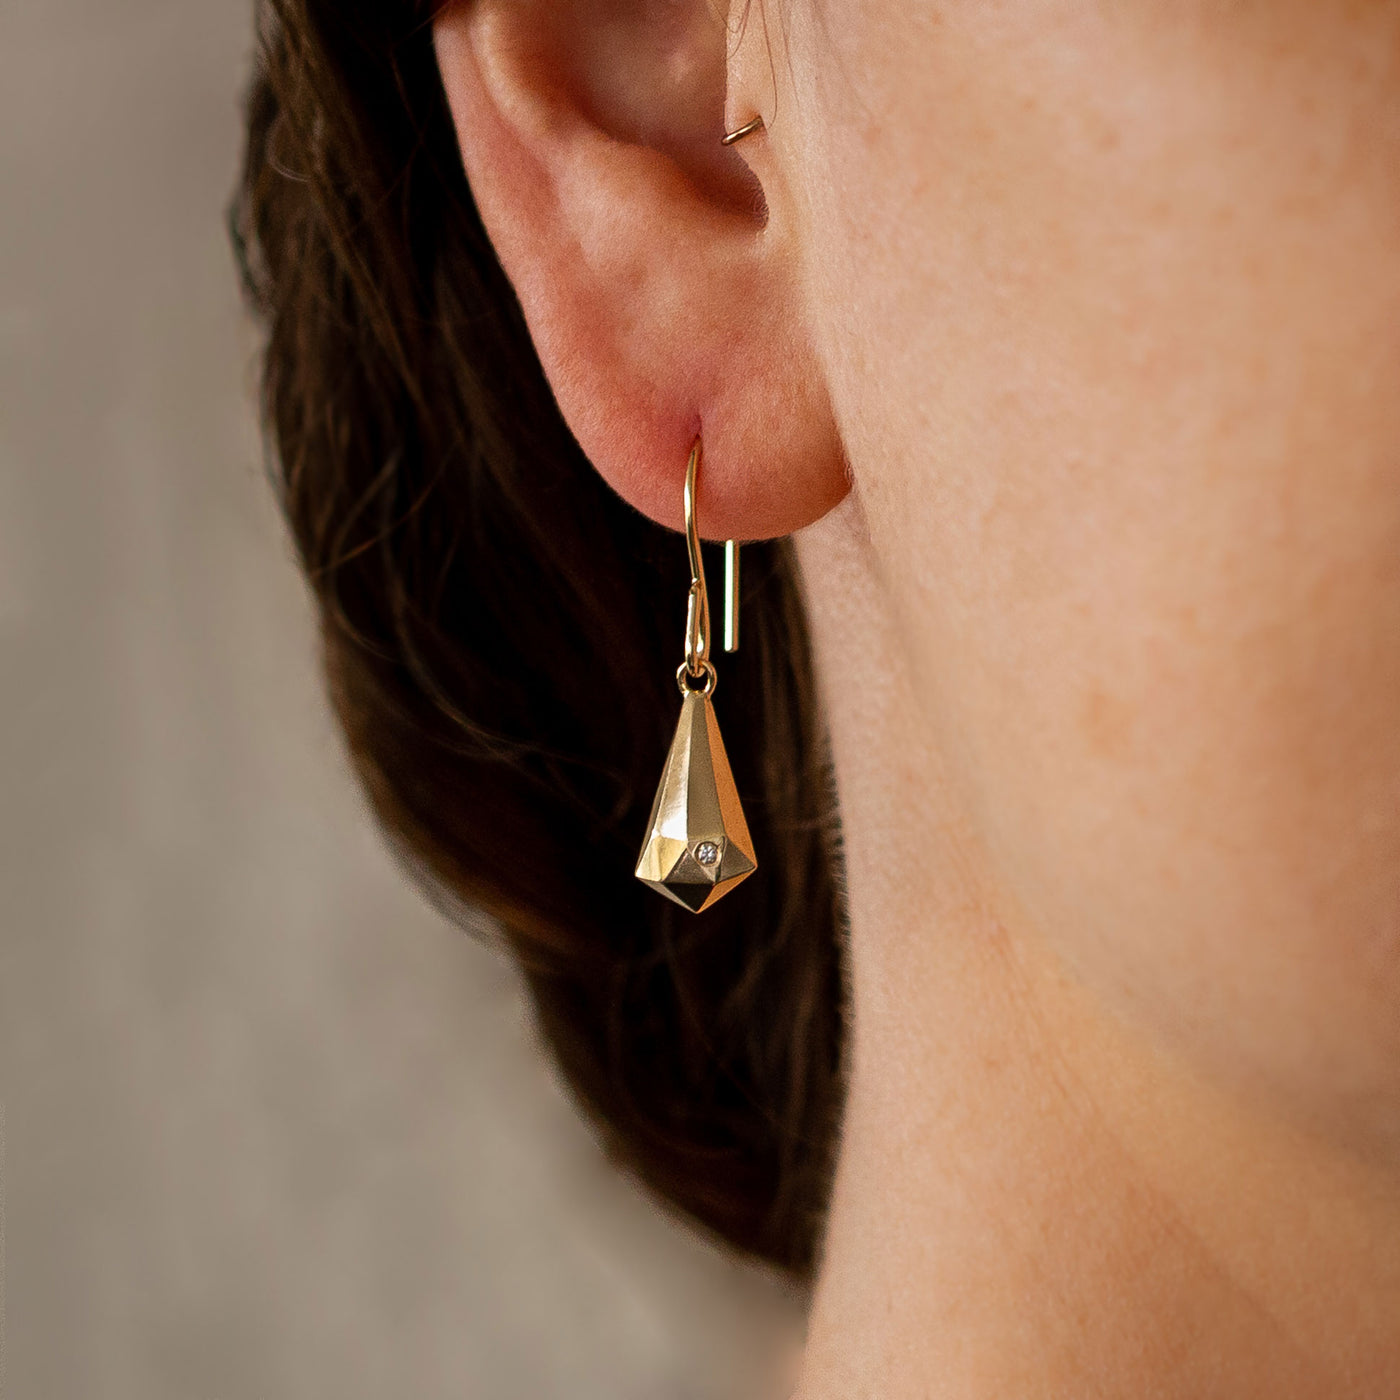 Gold and Diamond Faceted Drop Dangle Earrings on an ear